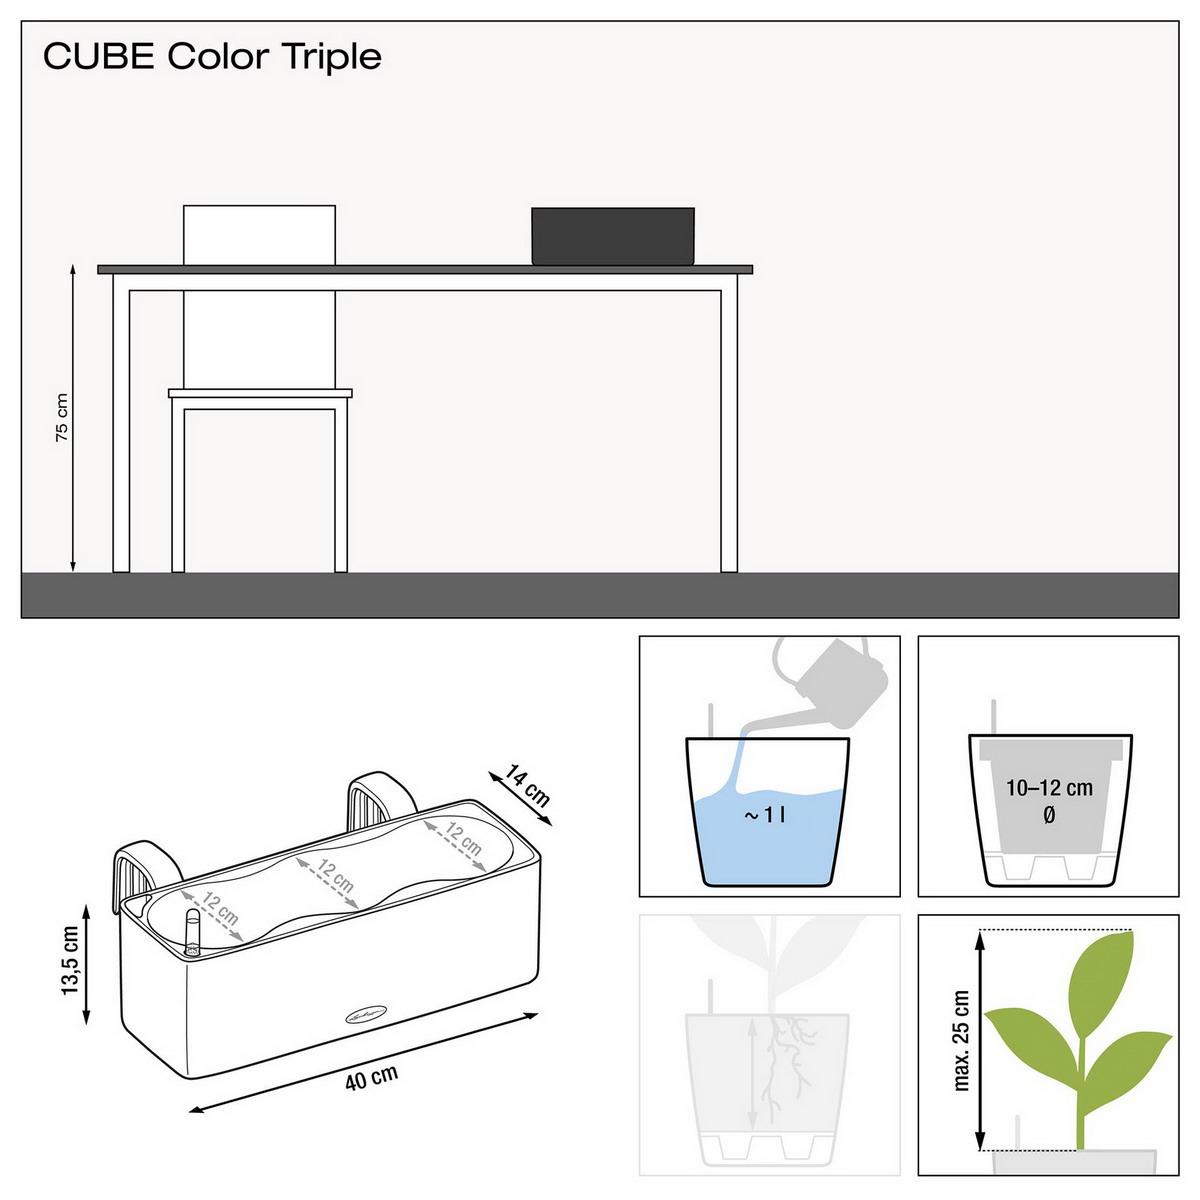 LECHUZA CUBE Color 16 Pistachio Poly Resin Table Self-watering Planter with Water Level Indicator H16 L17 W17 cm, 1.8L - citiplants.com